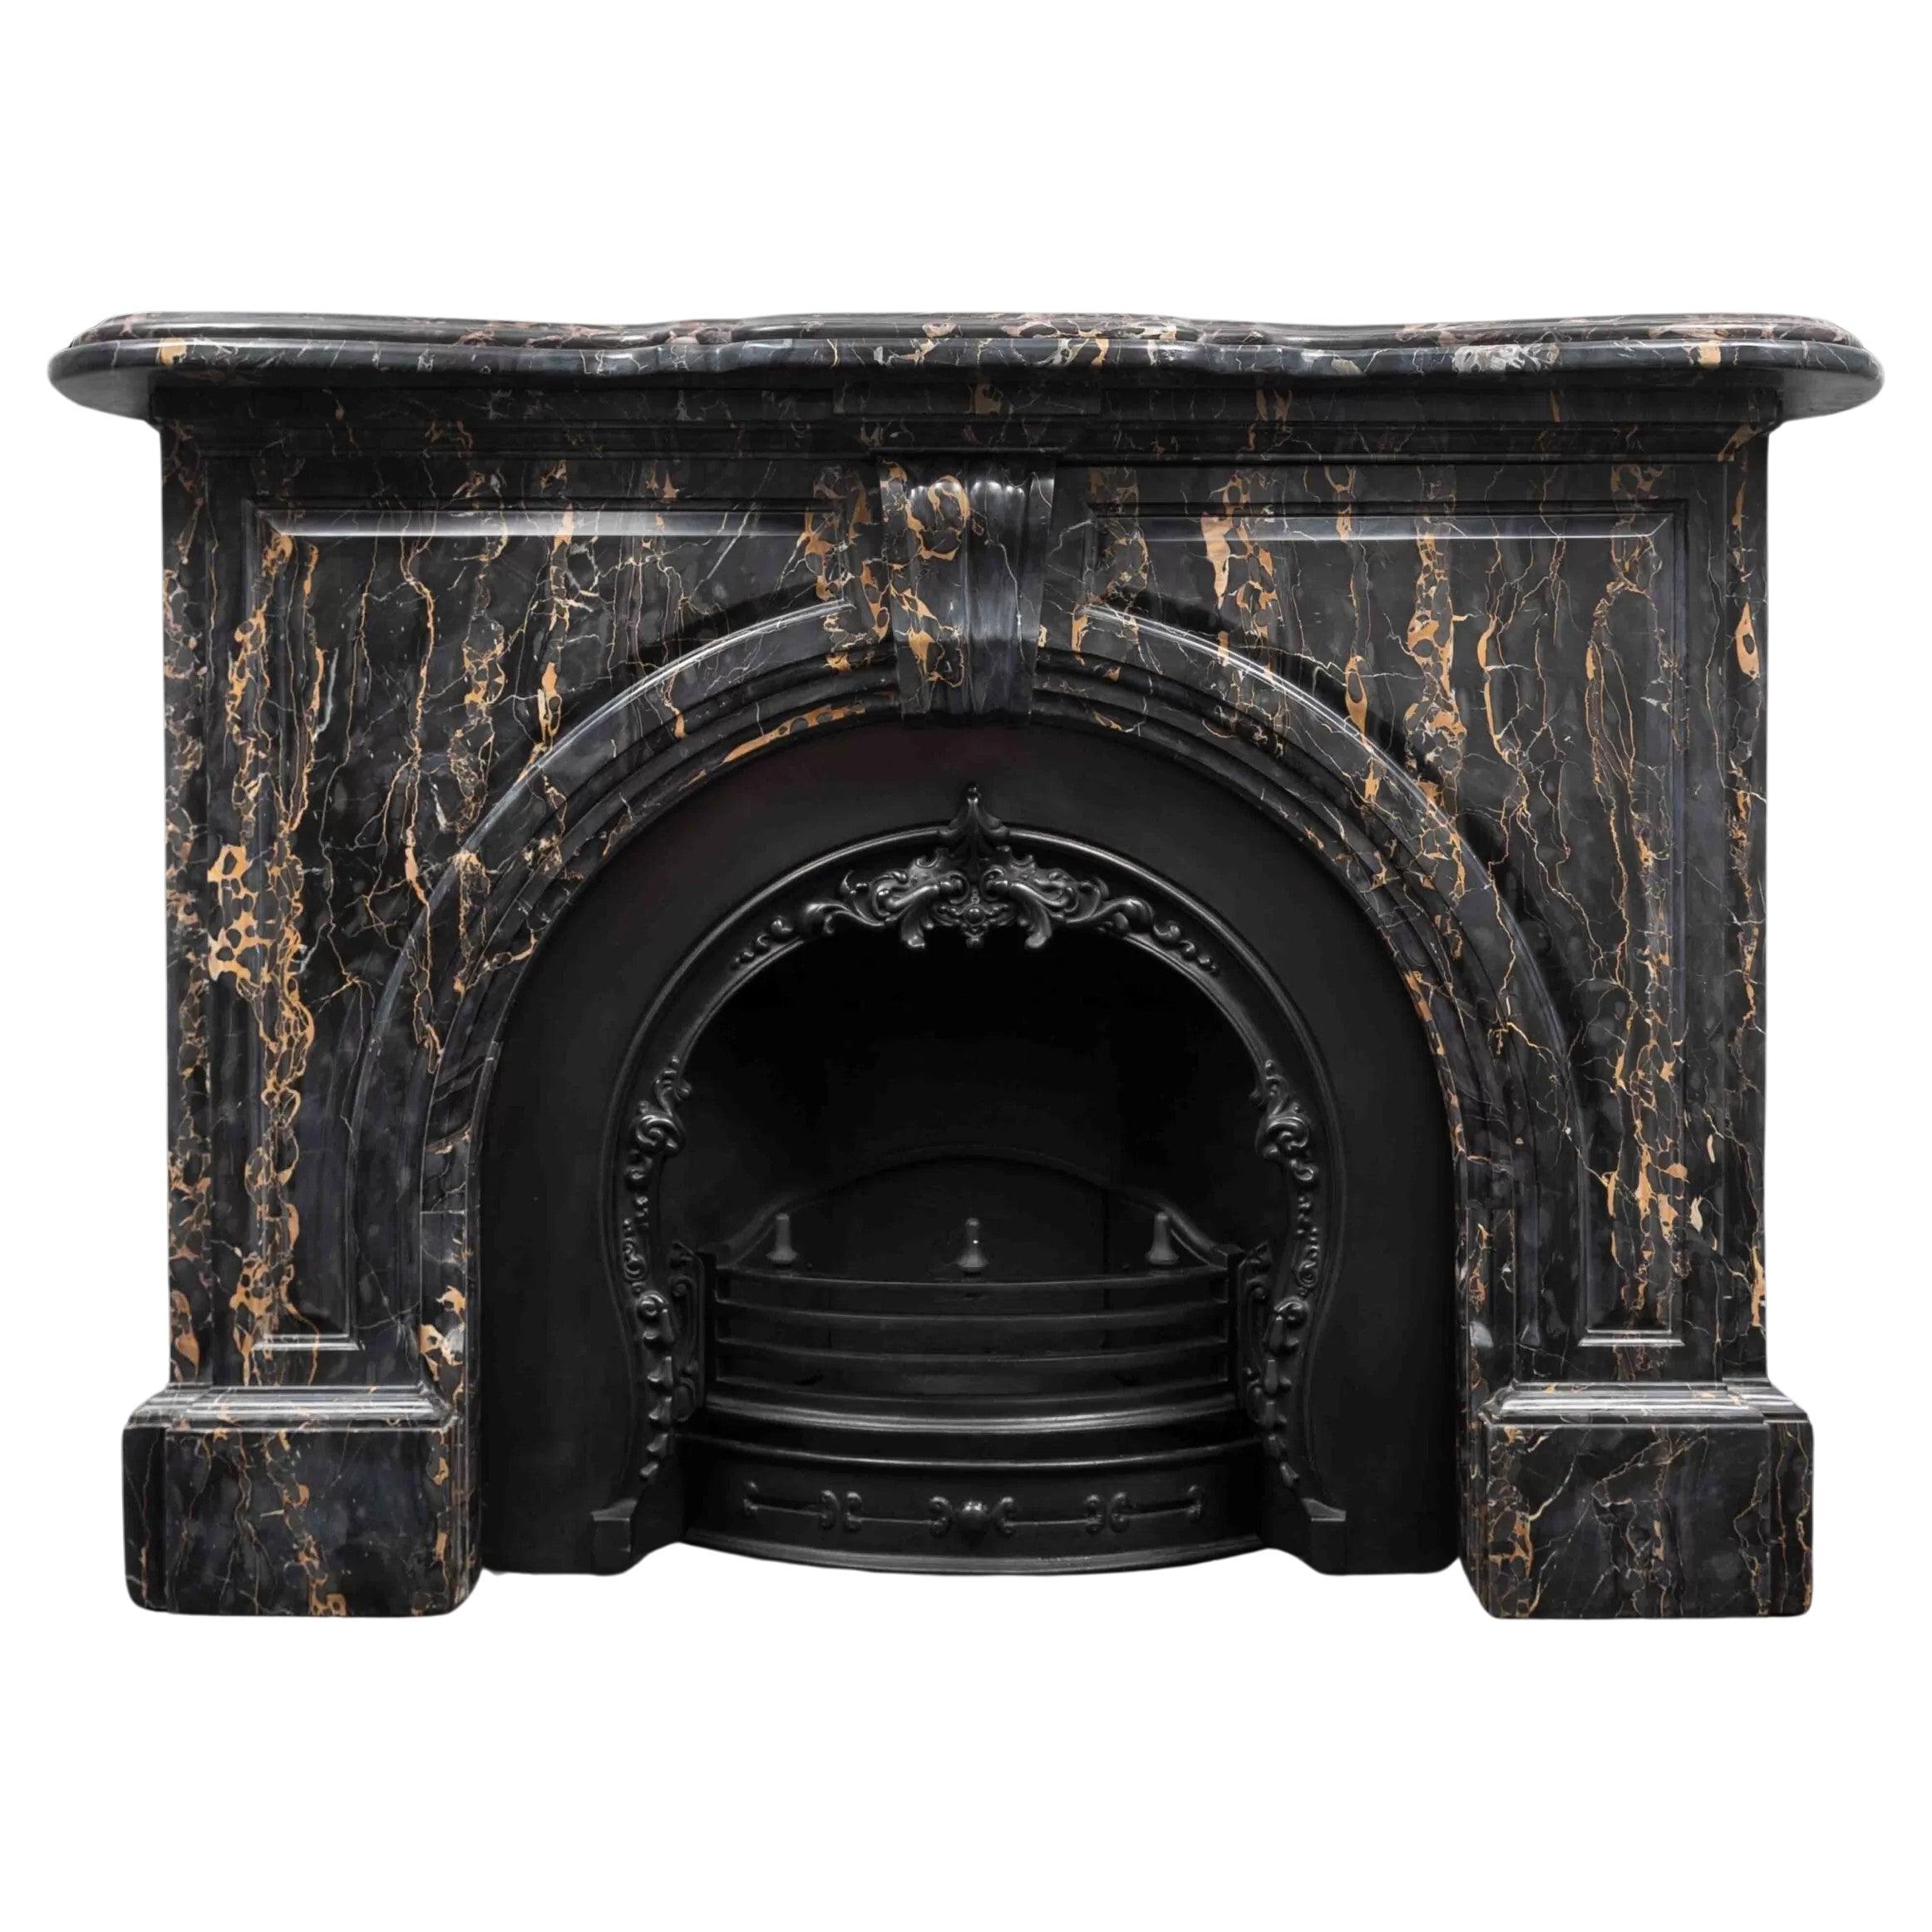 An antique Victorian period fireplace made from Portoro Nero marble